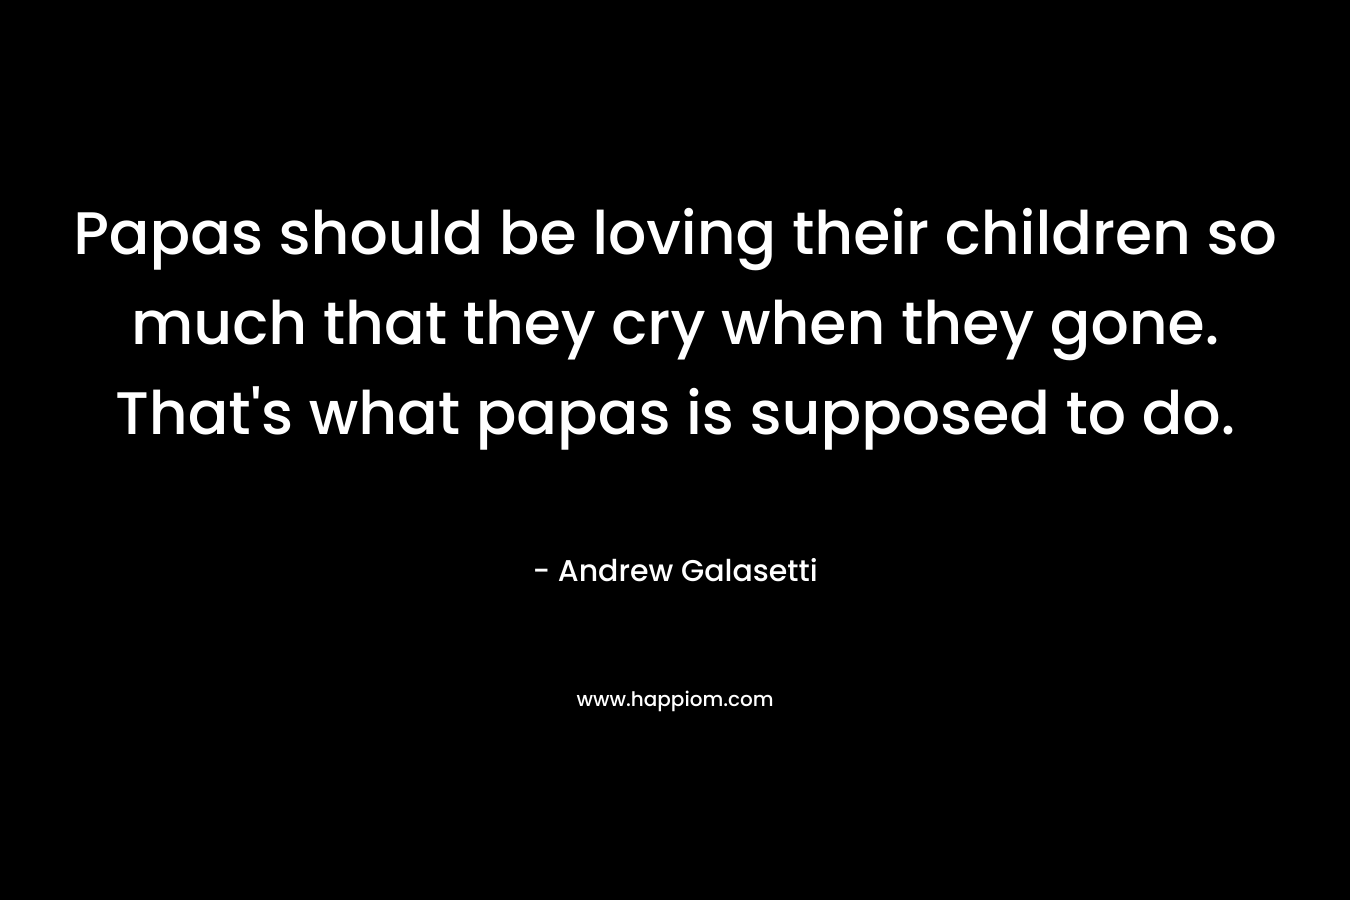 Papas should be loving their children so much that they cry when they gone. That’s what papas is supposed to do. – Andrew Galasetti